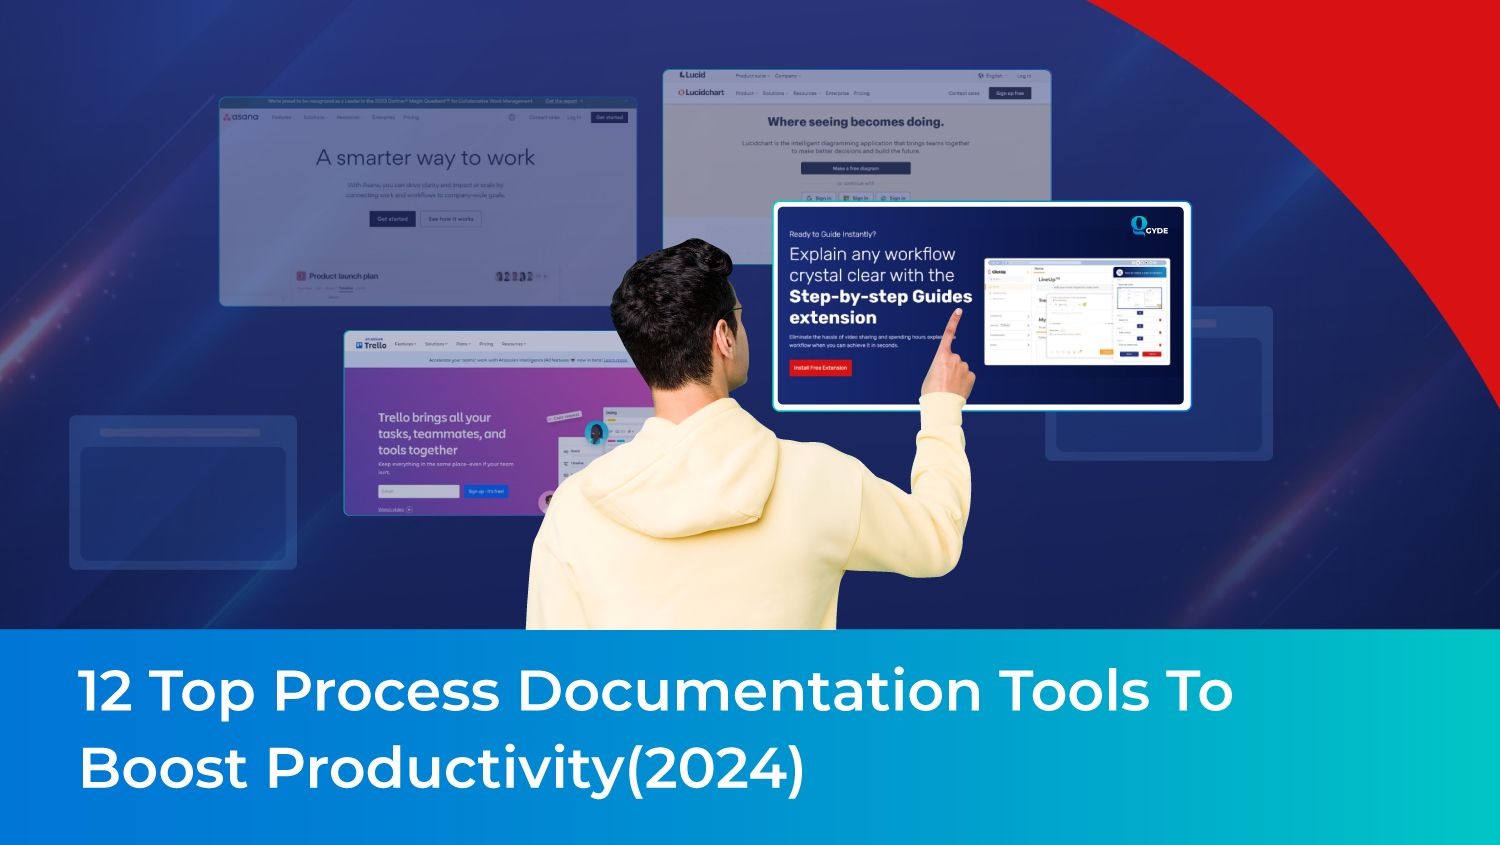 12 Top Process Documentation Tools To Boost Productivity (2024)